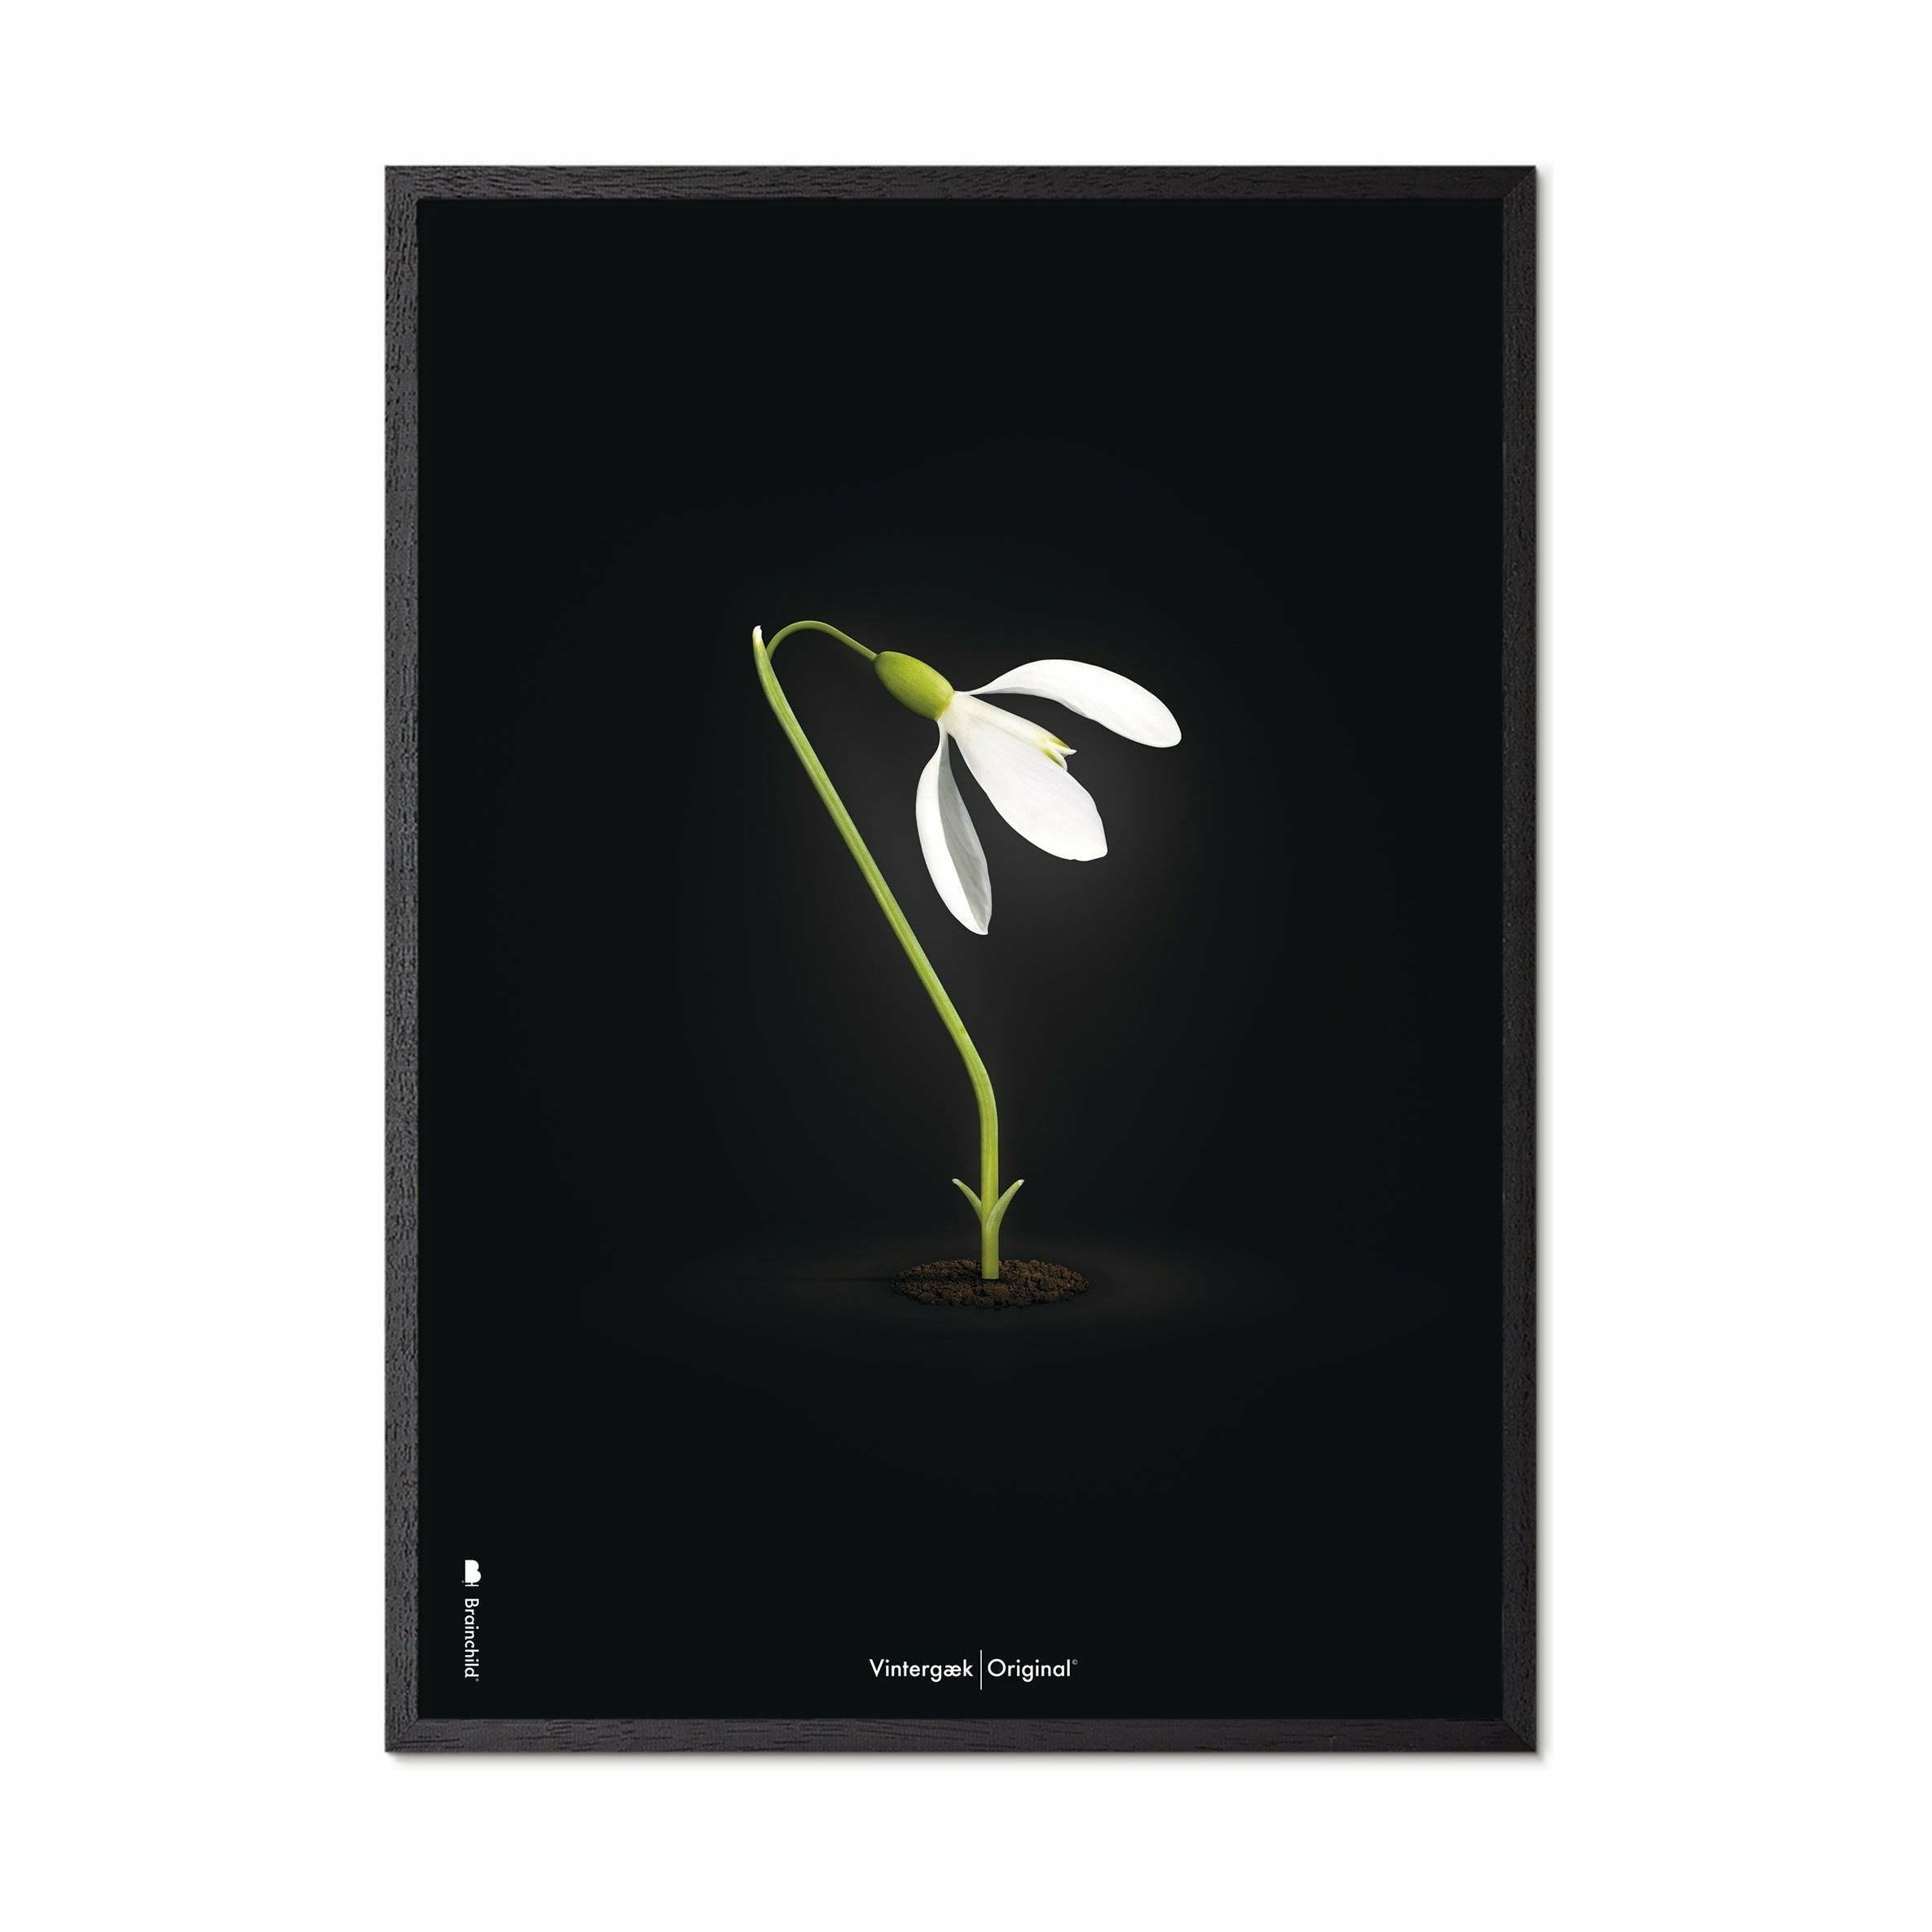 Brainchild Snowdrop Classic Poster, Frame In Black Lacquered Wood A5, Black Background